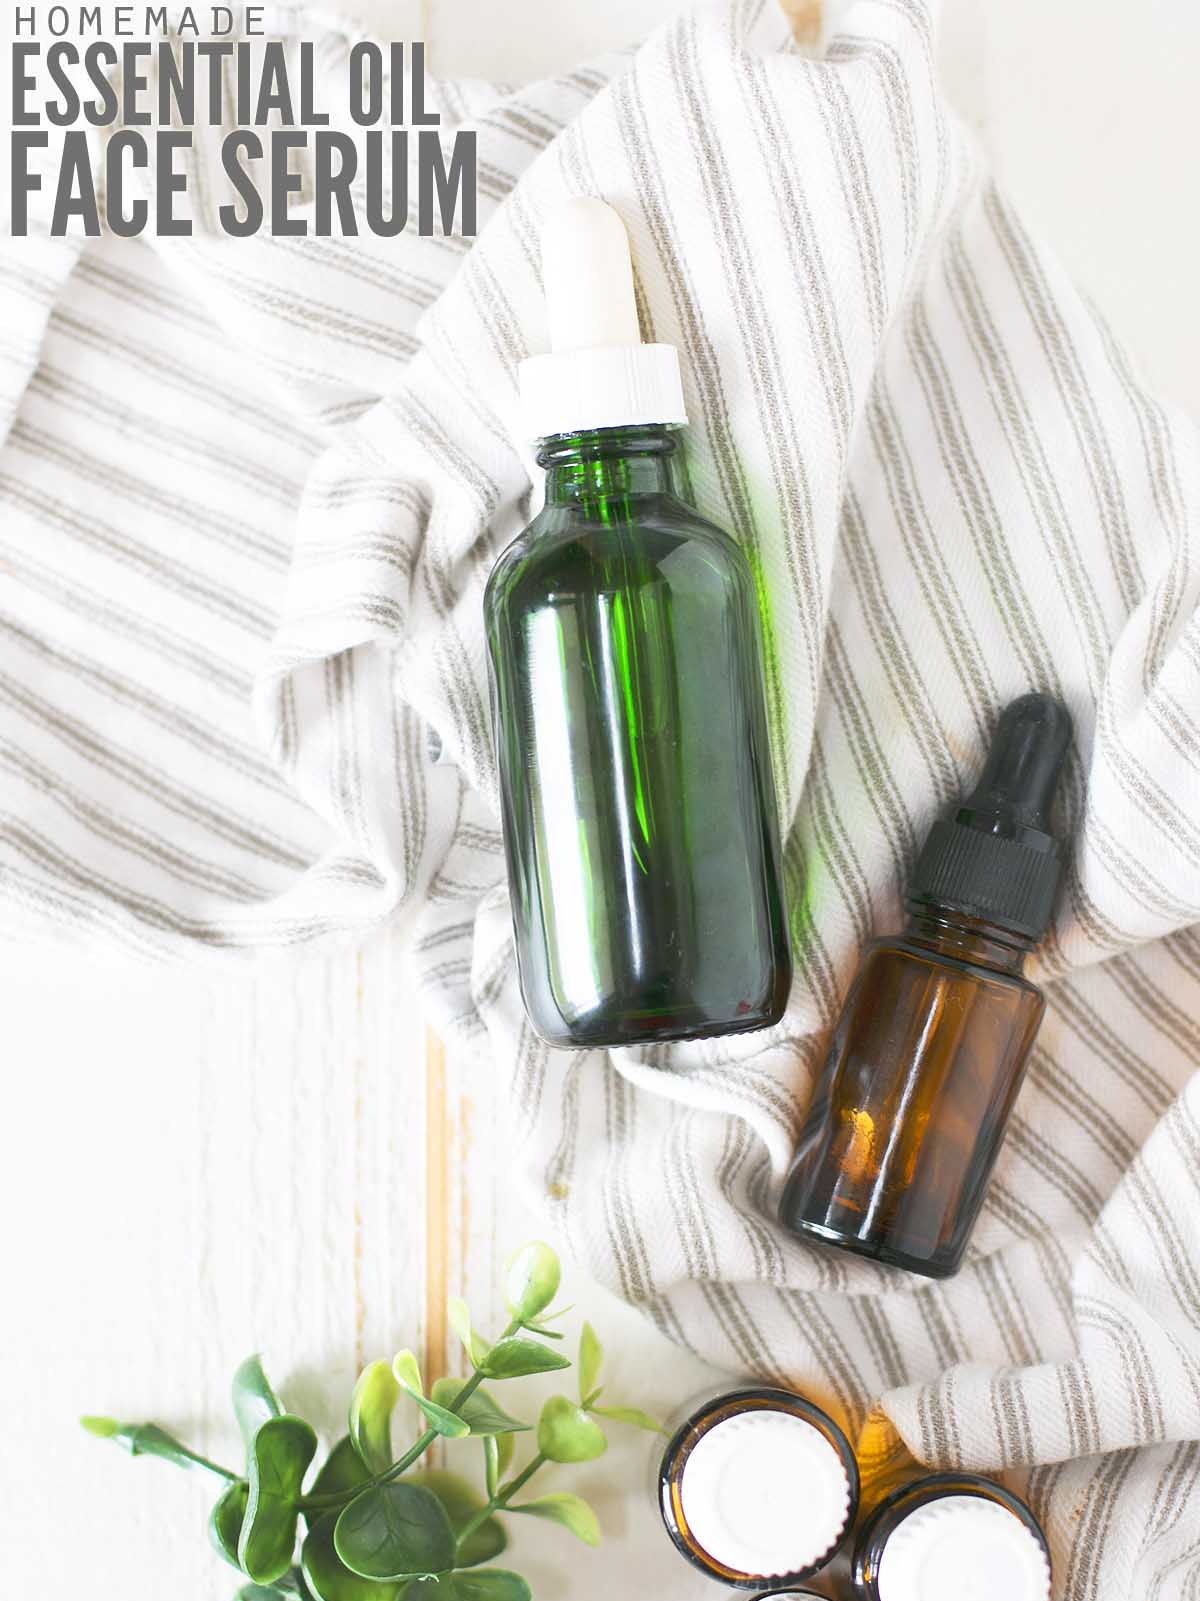 Vegetable and essential oils : find the one that suits you best